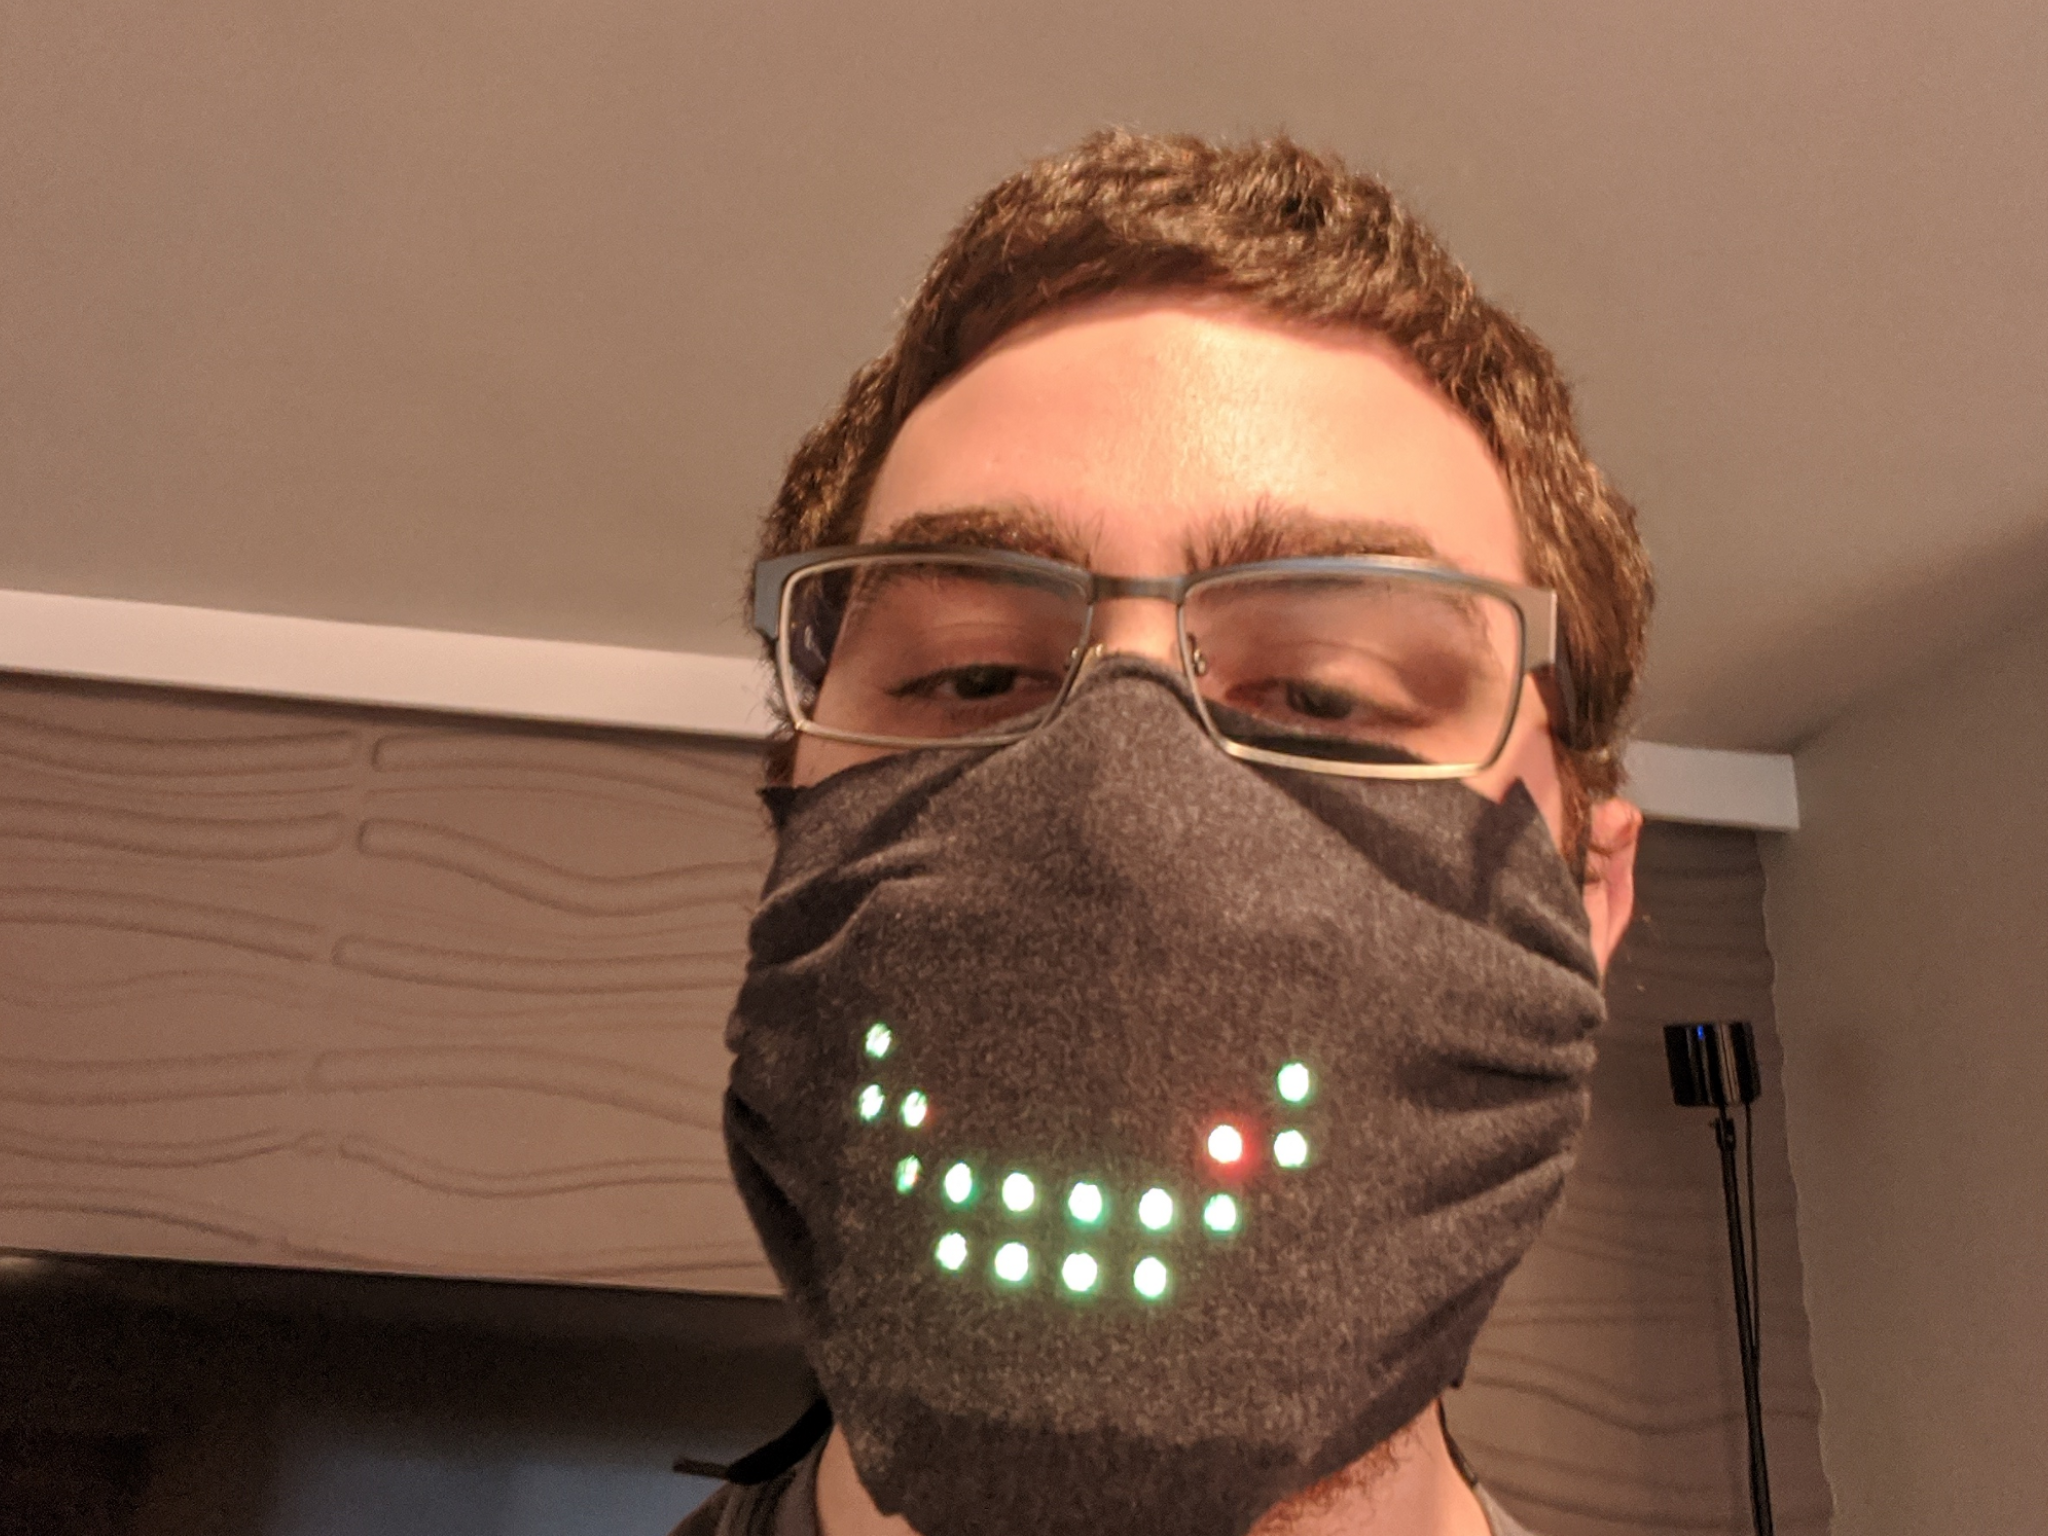 Home-made face mask uses LEDs to show you when someone is talking and smiling thumbnail